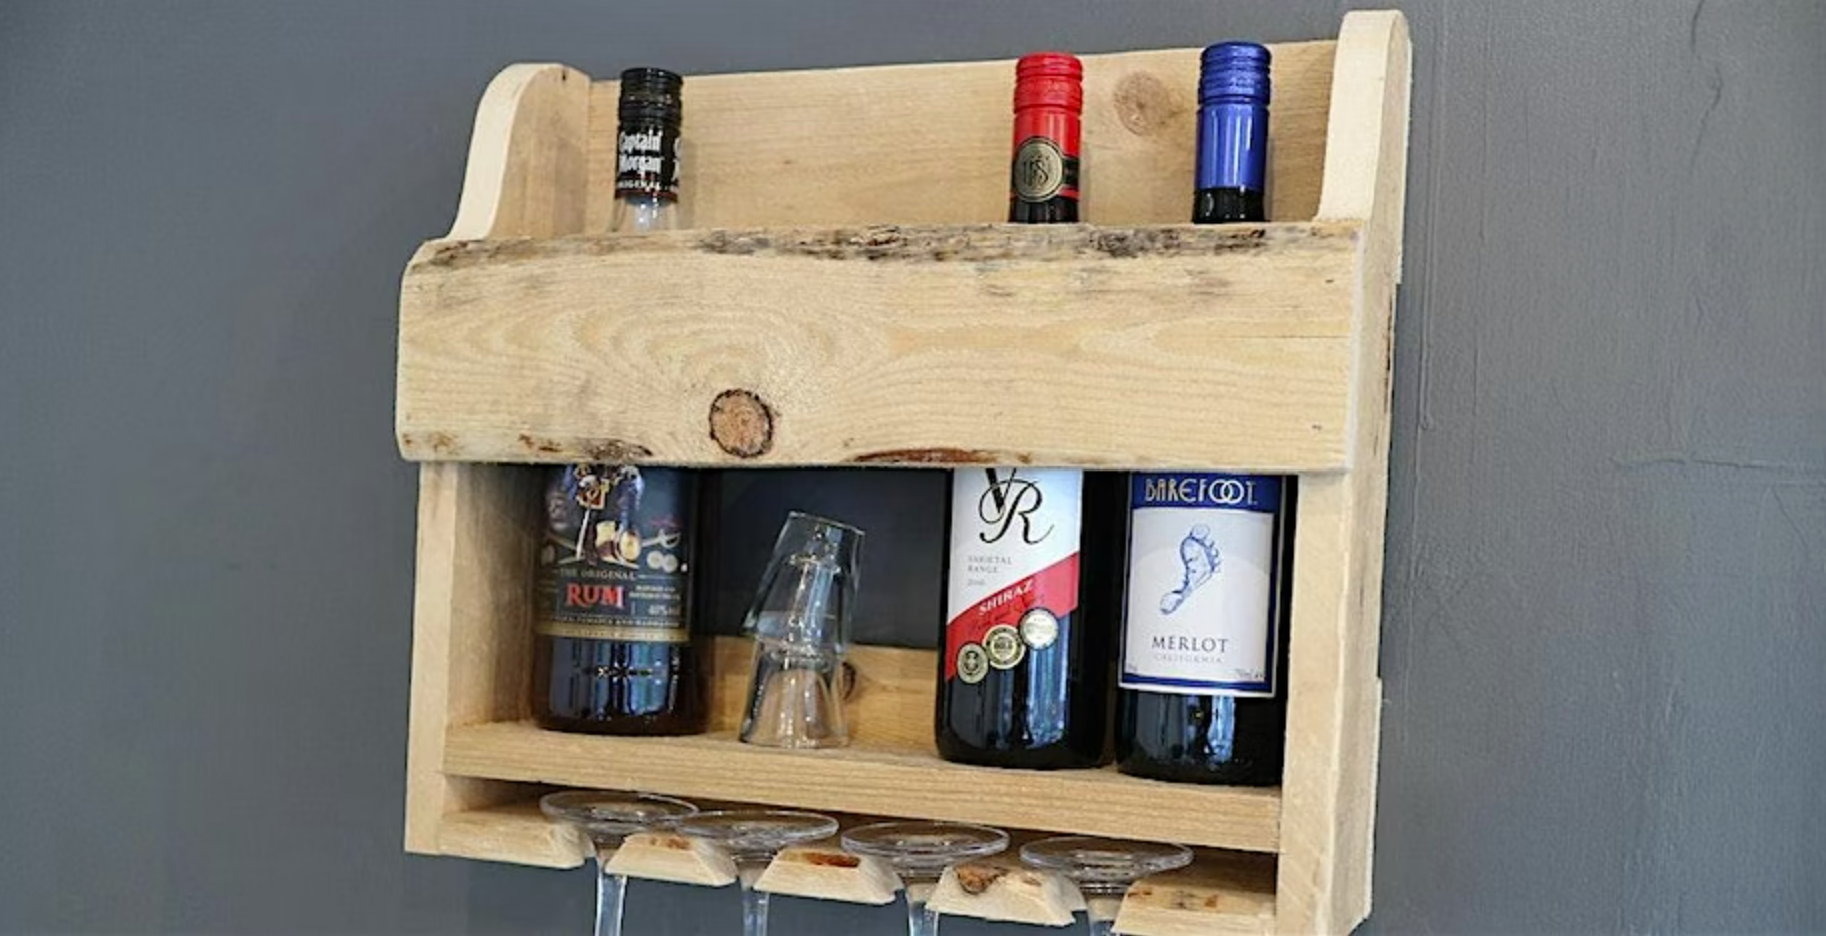 a picture of a wine rack mounted on a wall with wine bottles and glass in ut